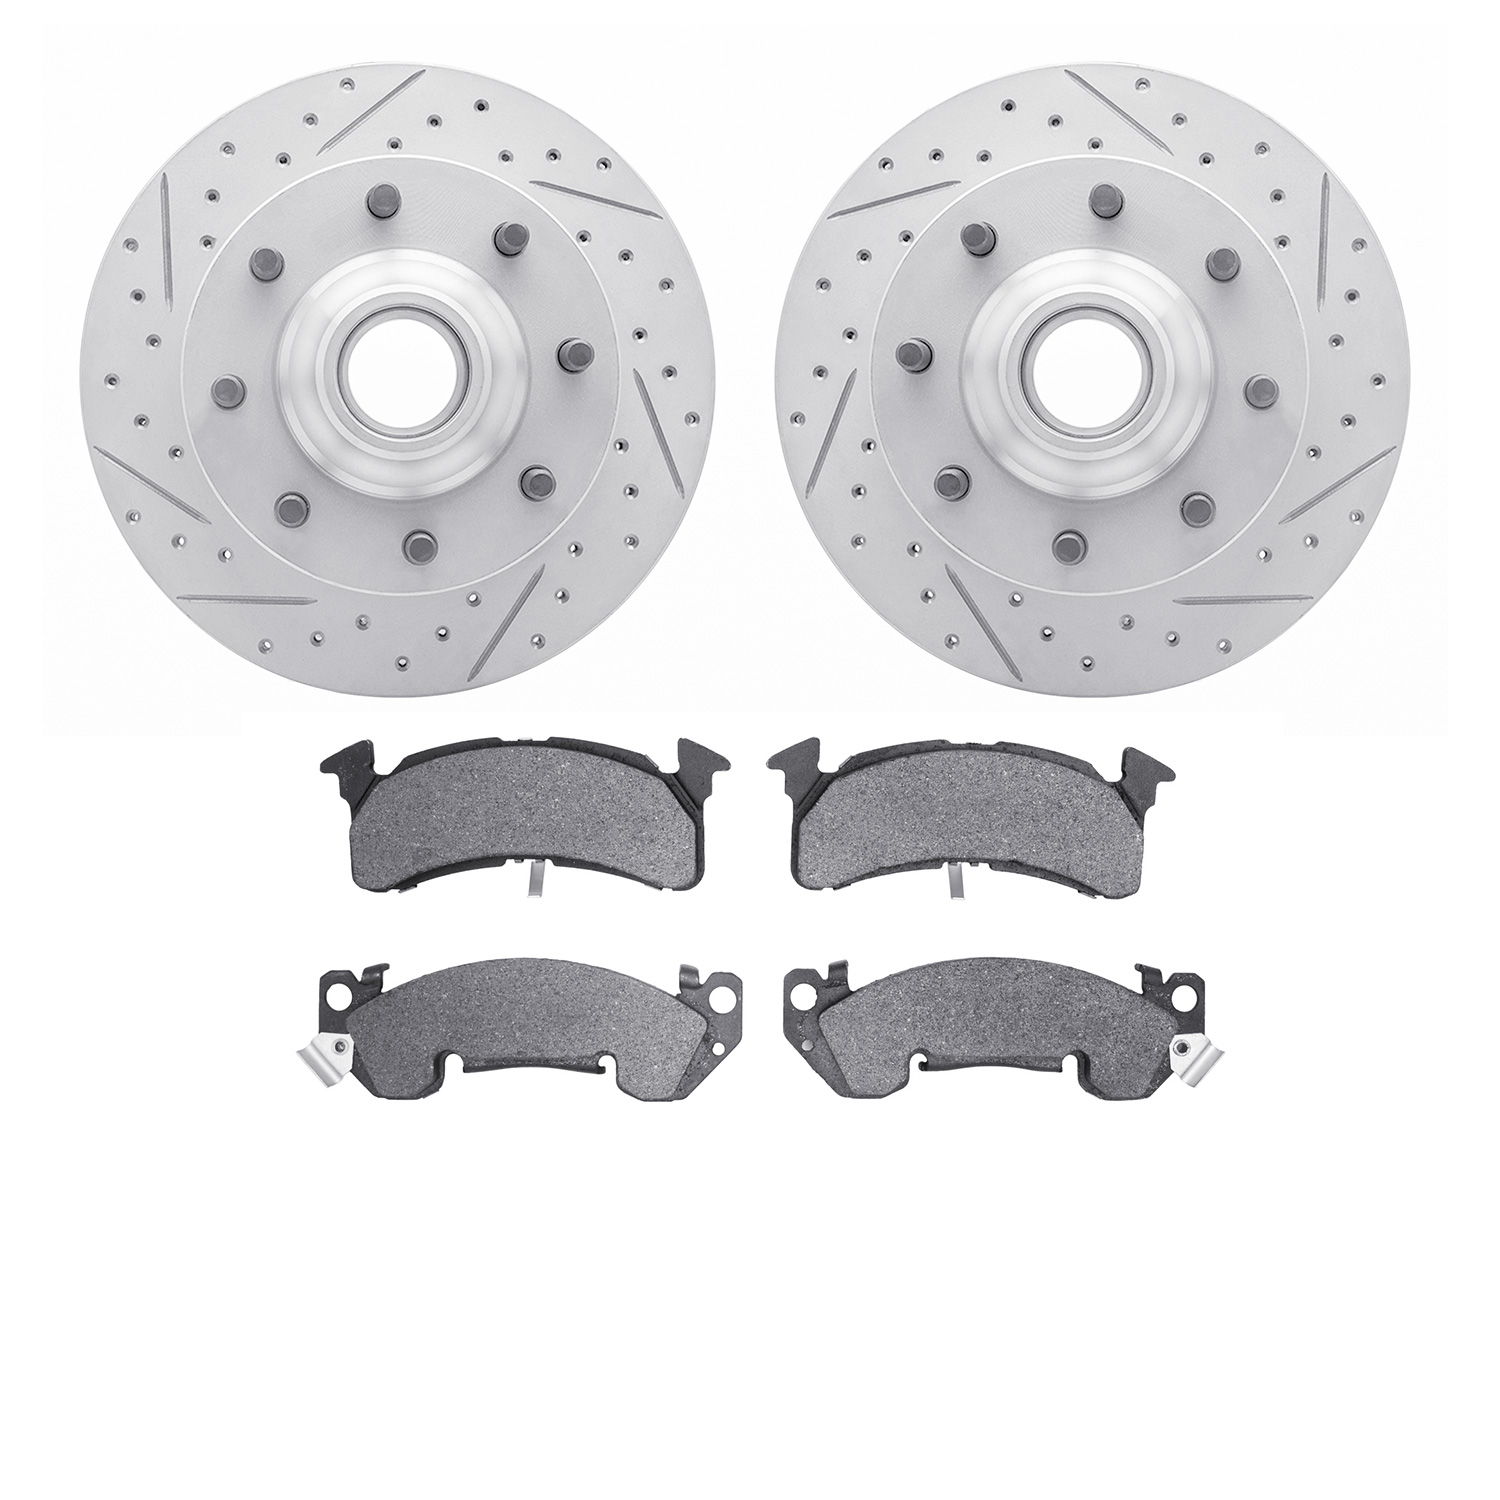 2202-48006 Geoperformance Drilled/Slotted Rotors w/Heavy-Duty Pads Kit, 1978-1993 GM, Position: Front